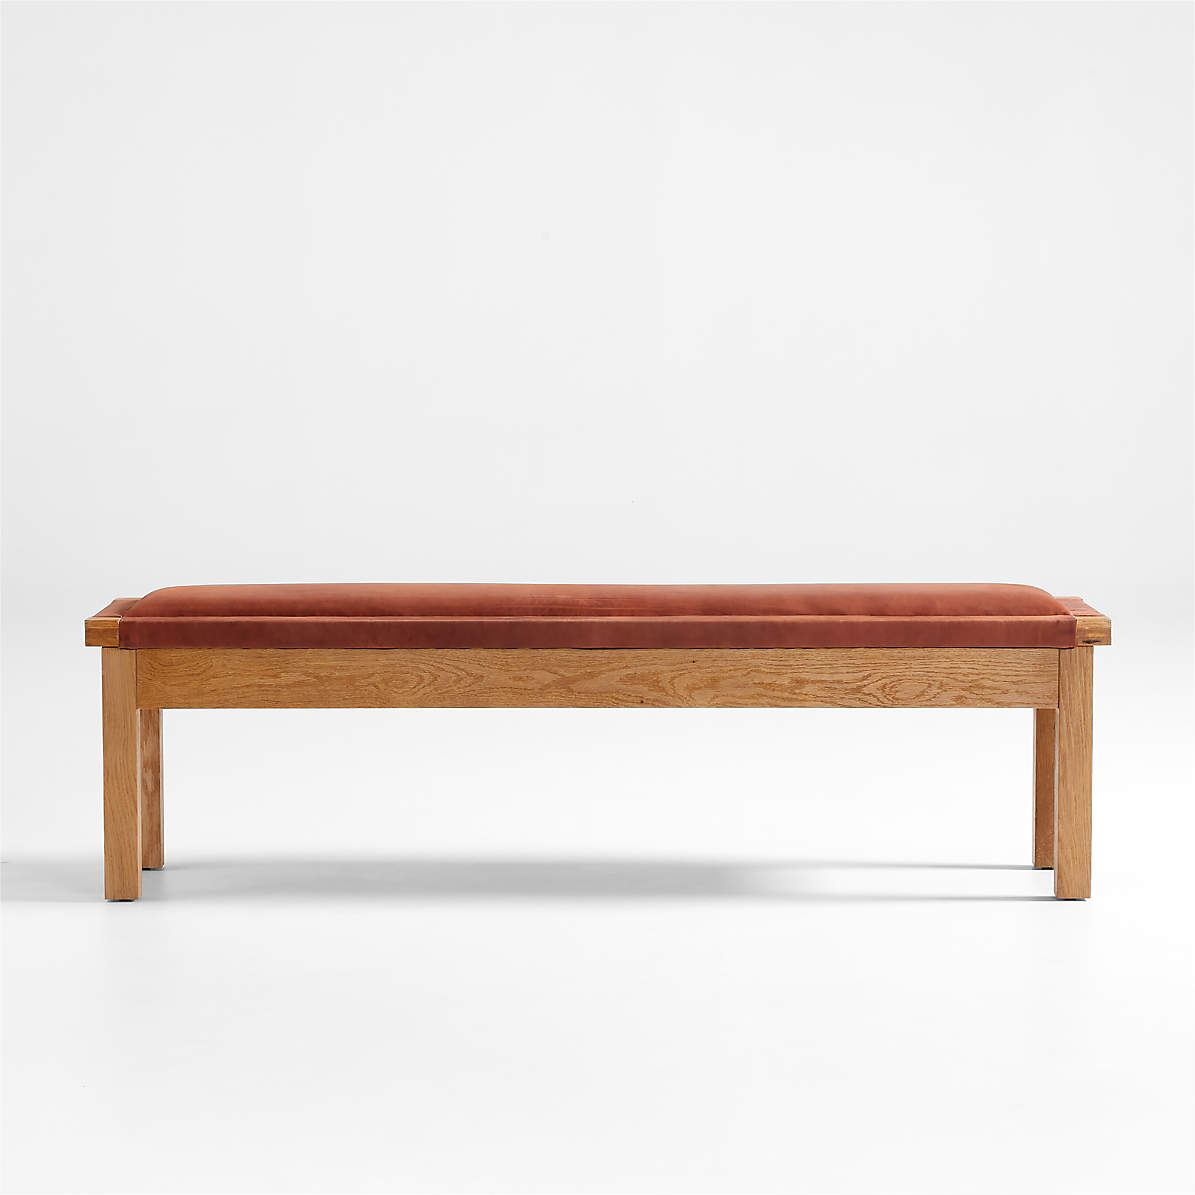 Shinola Hotel Wood And Leather Bench, Leather Entry Bench